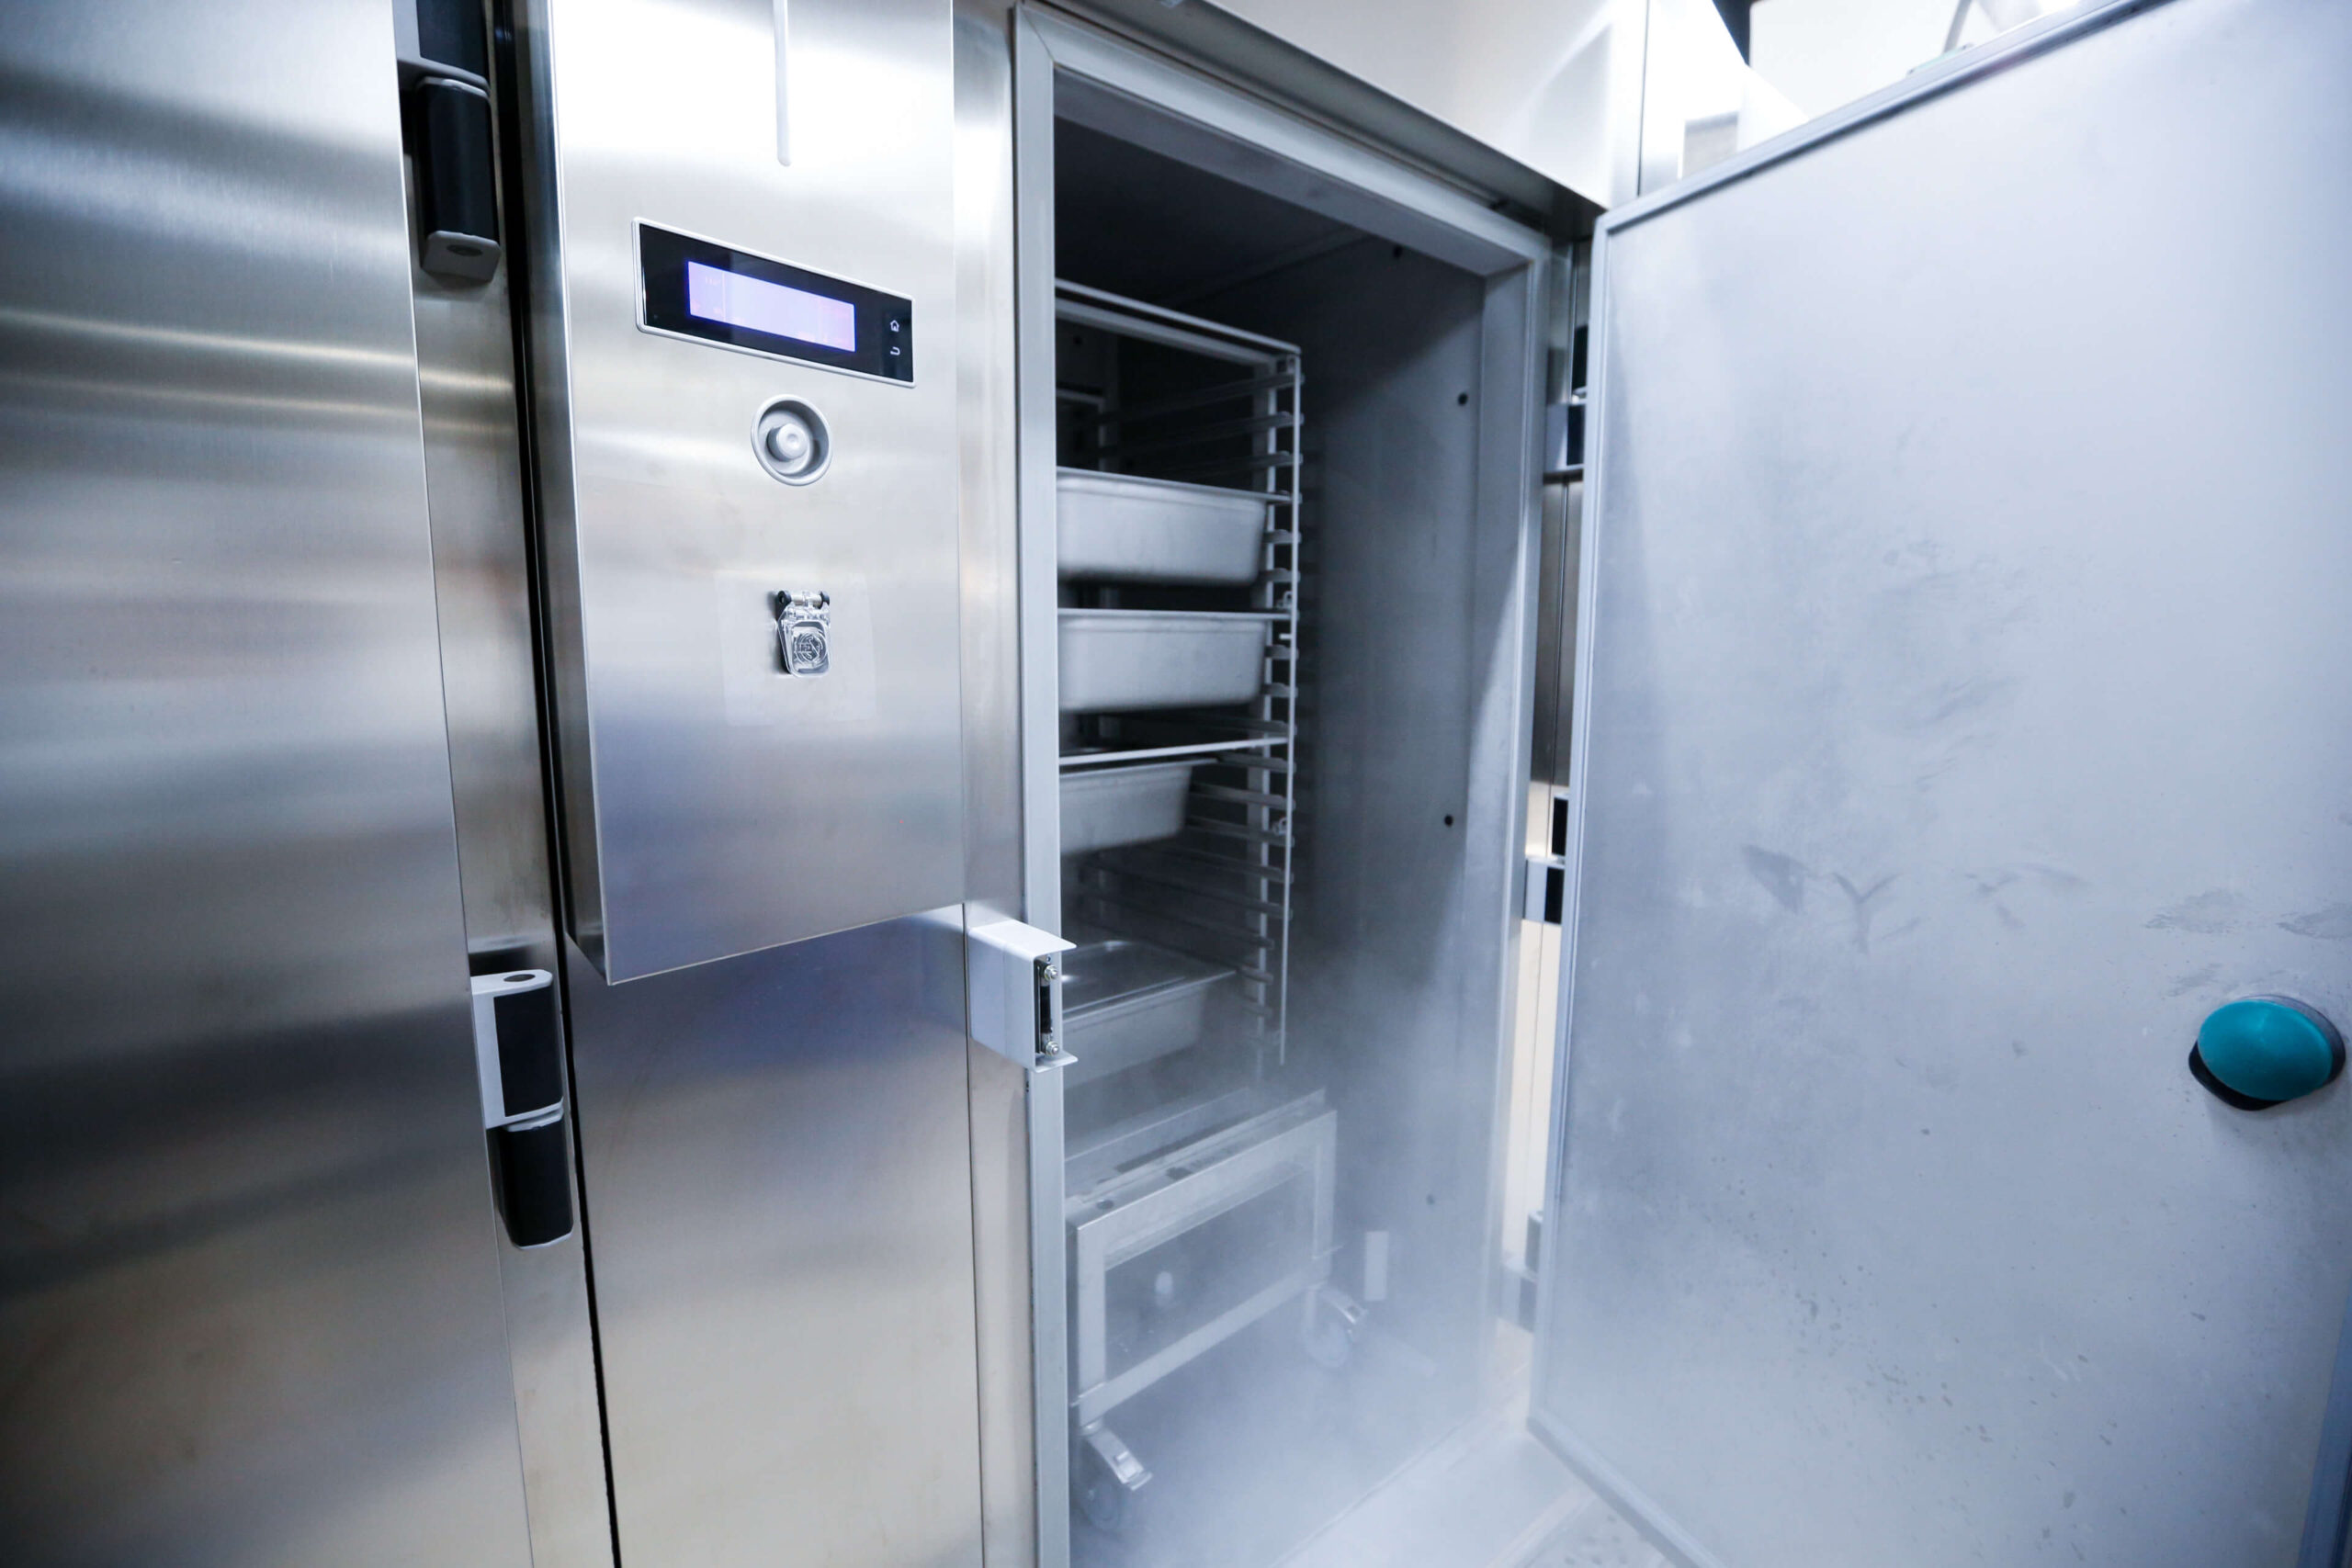 Blog: Commercial Freezer Temperature Monitoring Alarms with Wi-Fi